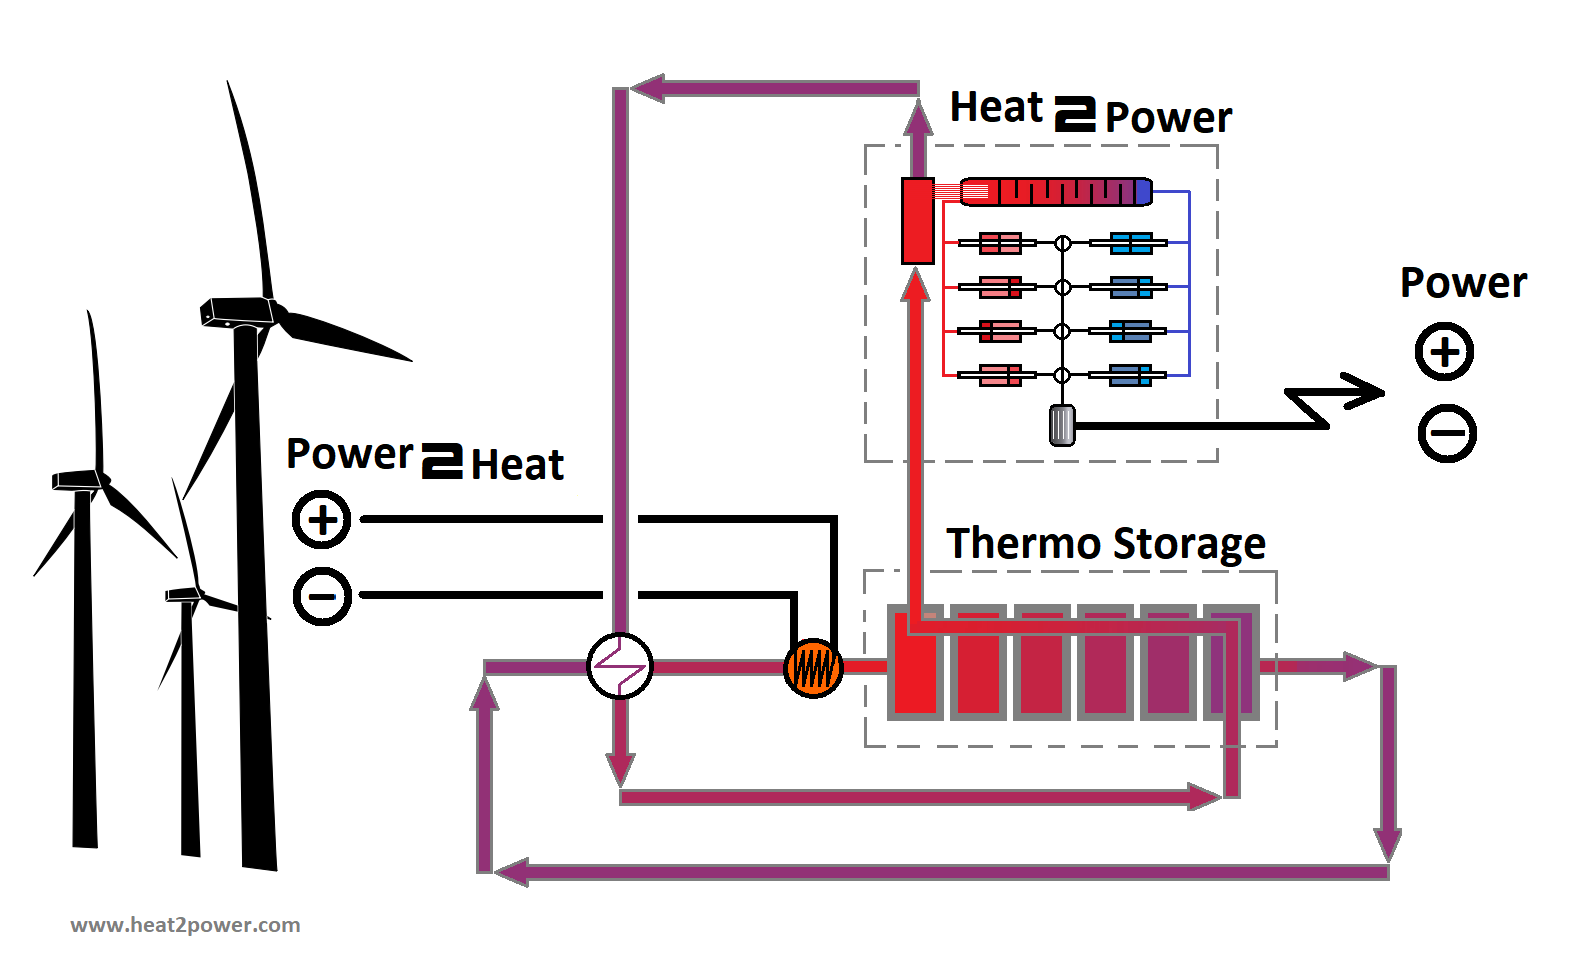 Base load smoothing of RE generation and continuous provision of electricity with thermal storage and new hot gas engine system